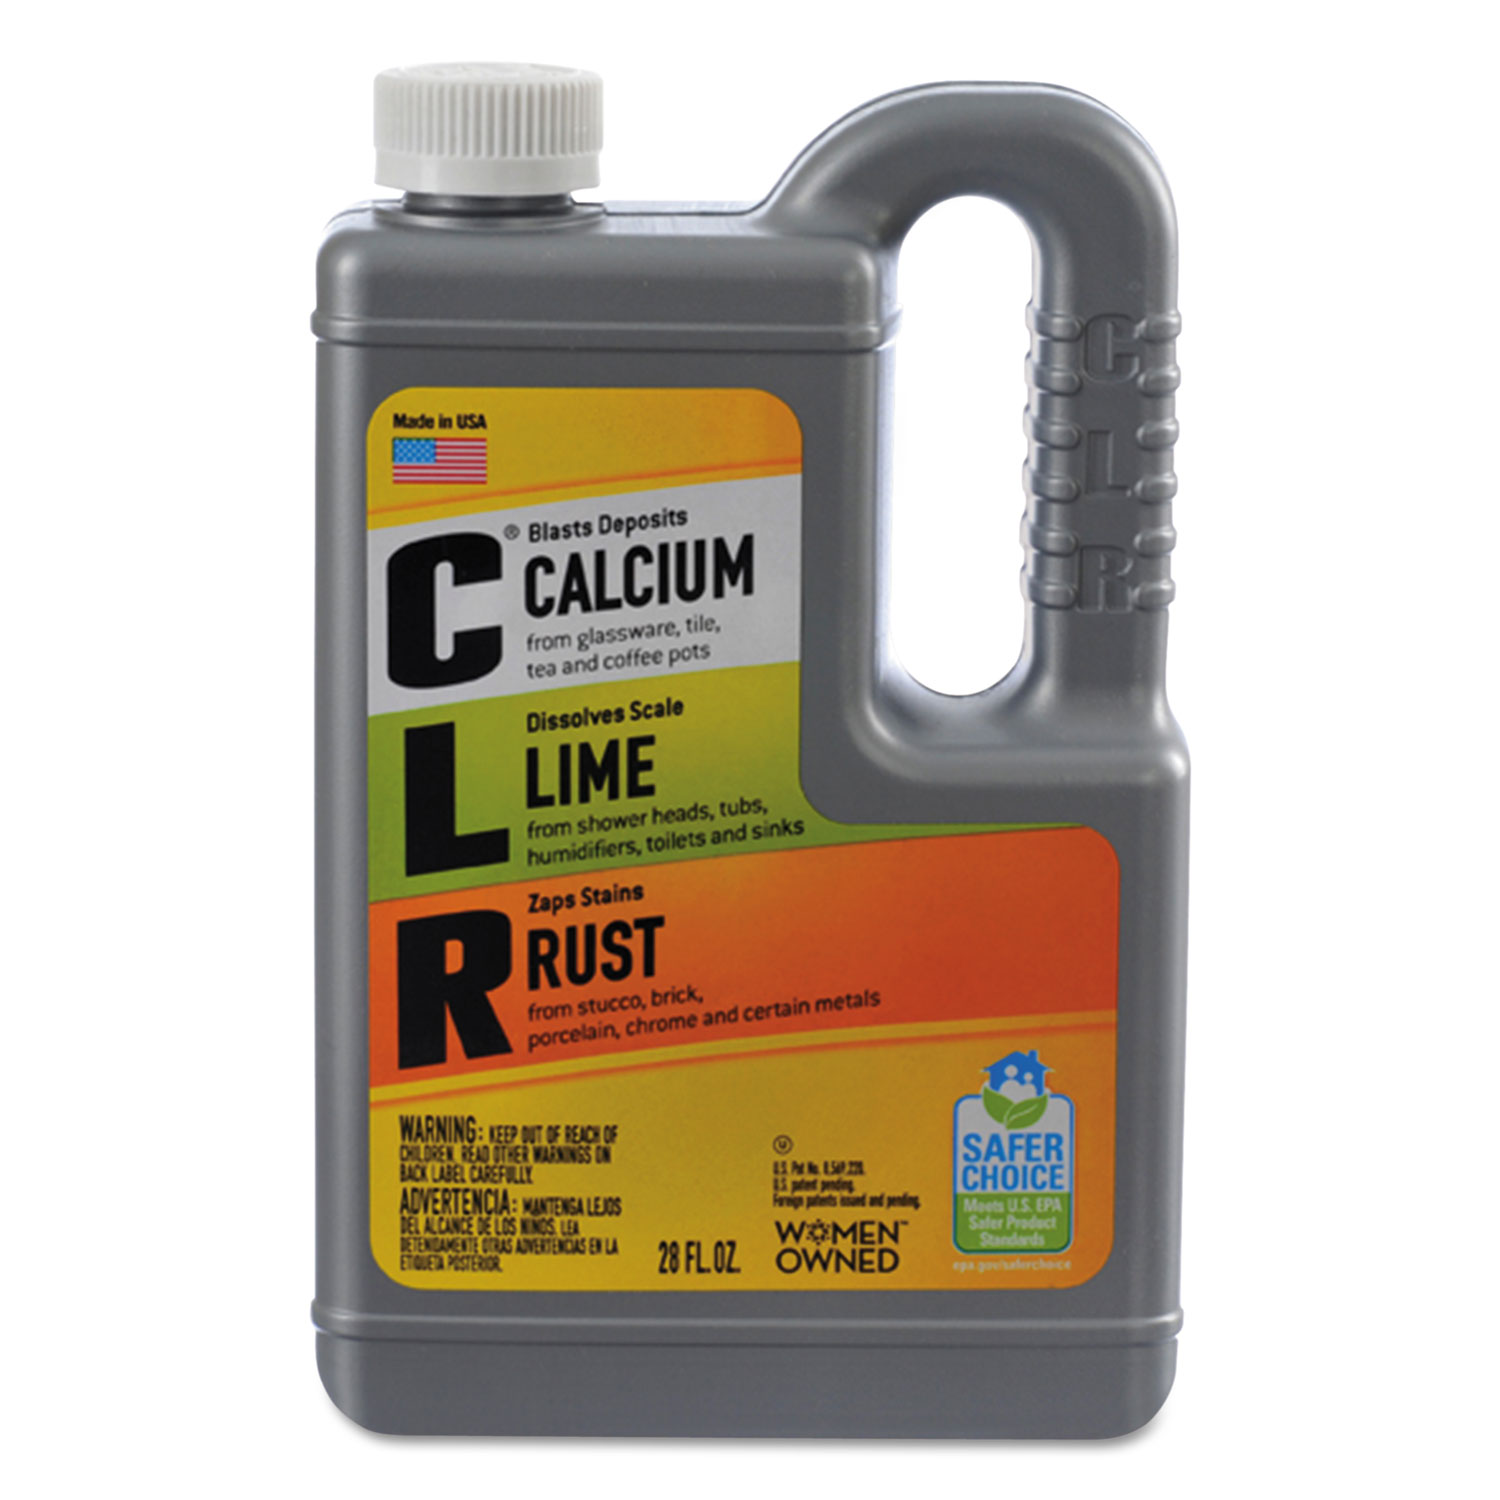  CLR CL-12 Calcium, Lime and Rust Remover, 28 oz Bottle, 12/Carton (JELCL12) 